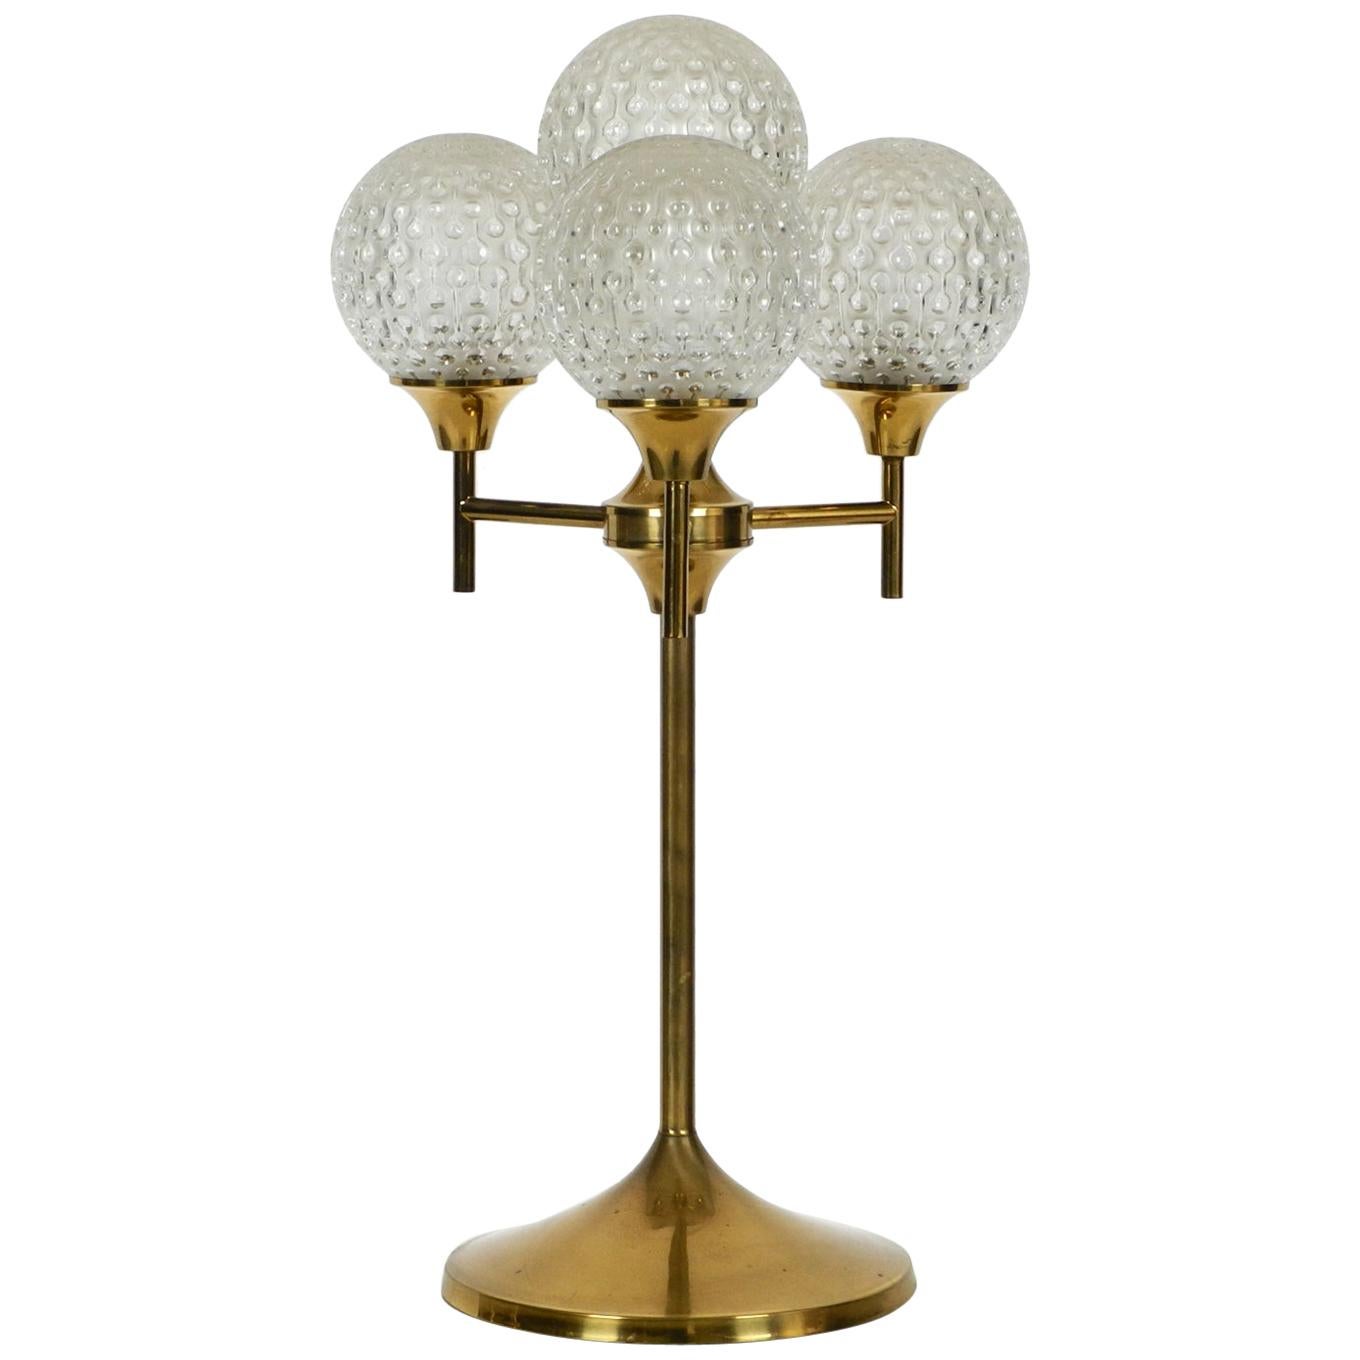 Exceptional Large 1960s Full Brass Table or Floor Lamp with 4 Glass Balls